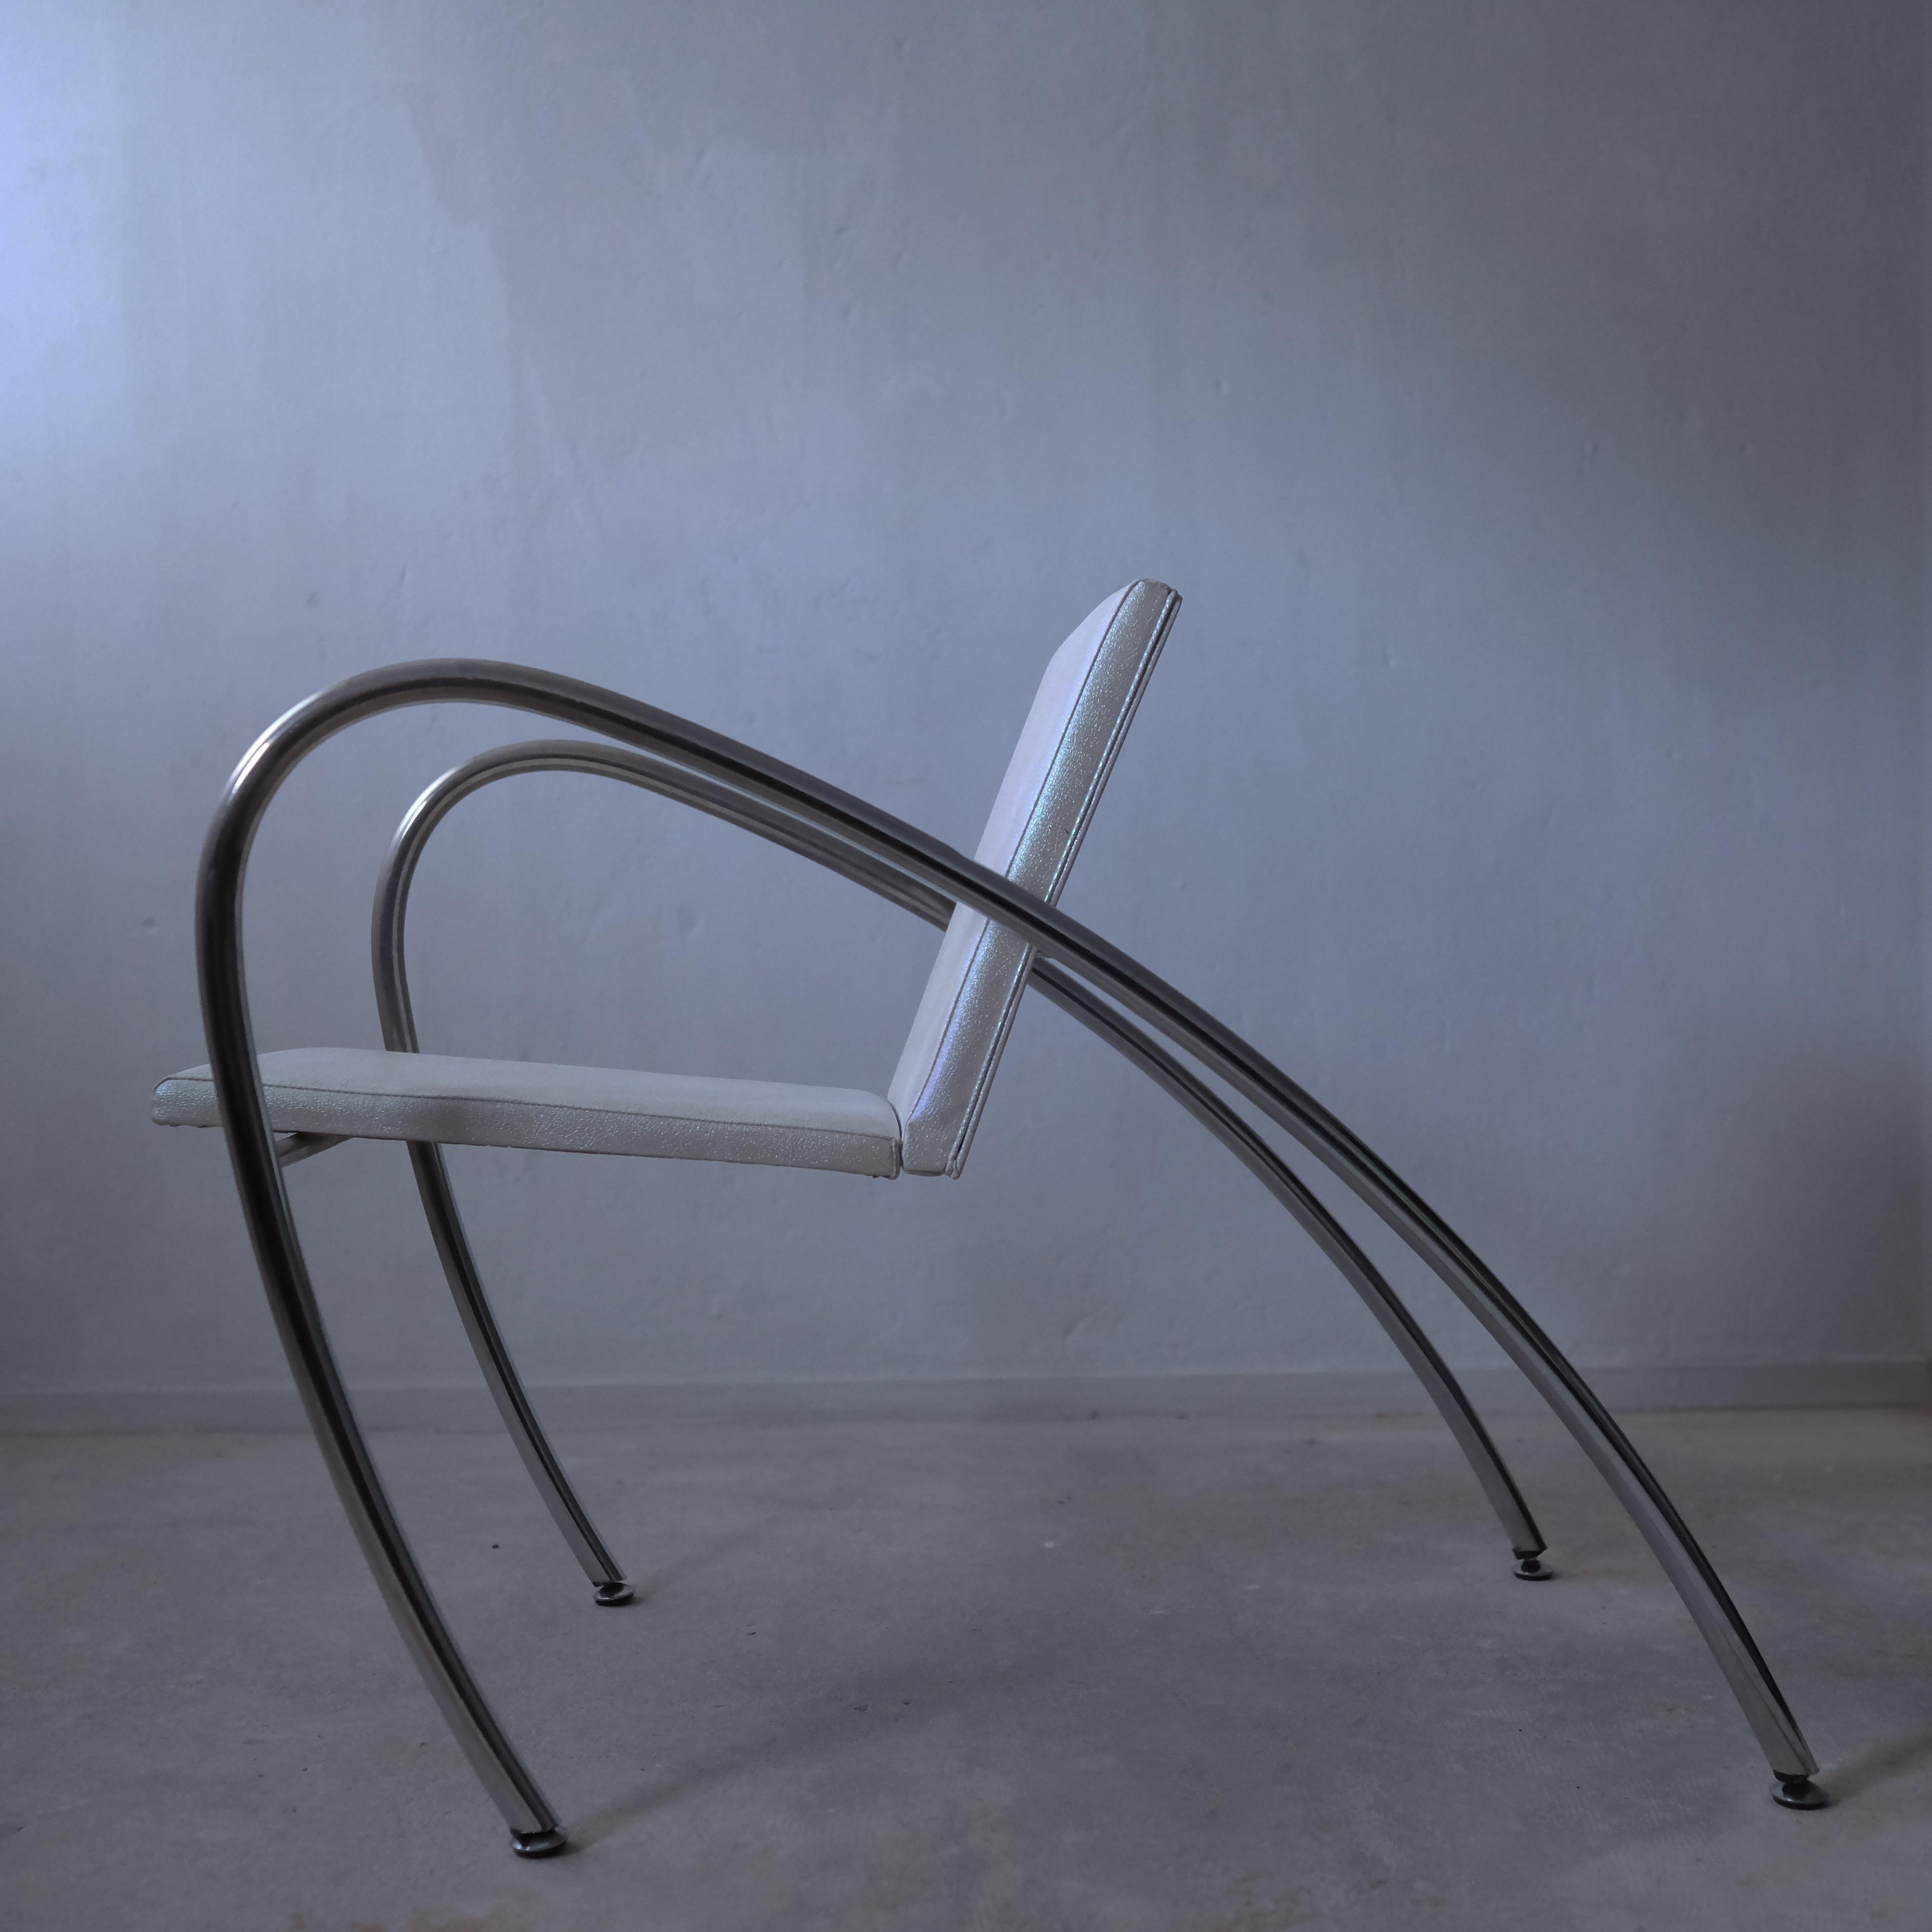 Steel Alain Domingo and François Scali  pair of Moreno - Marini Chairs For Sale